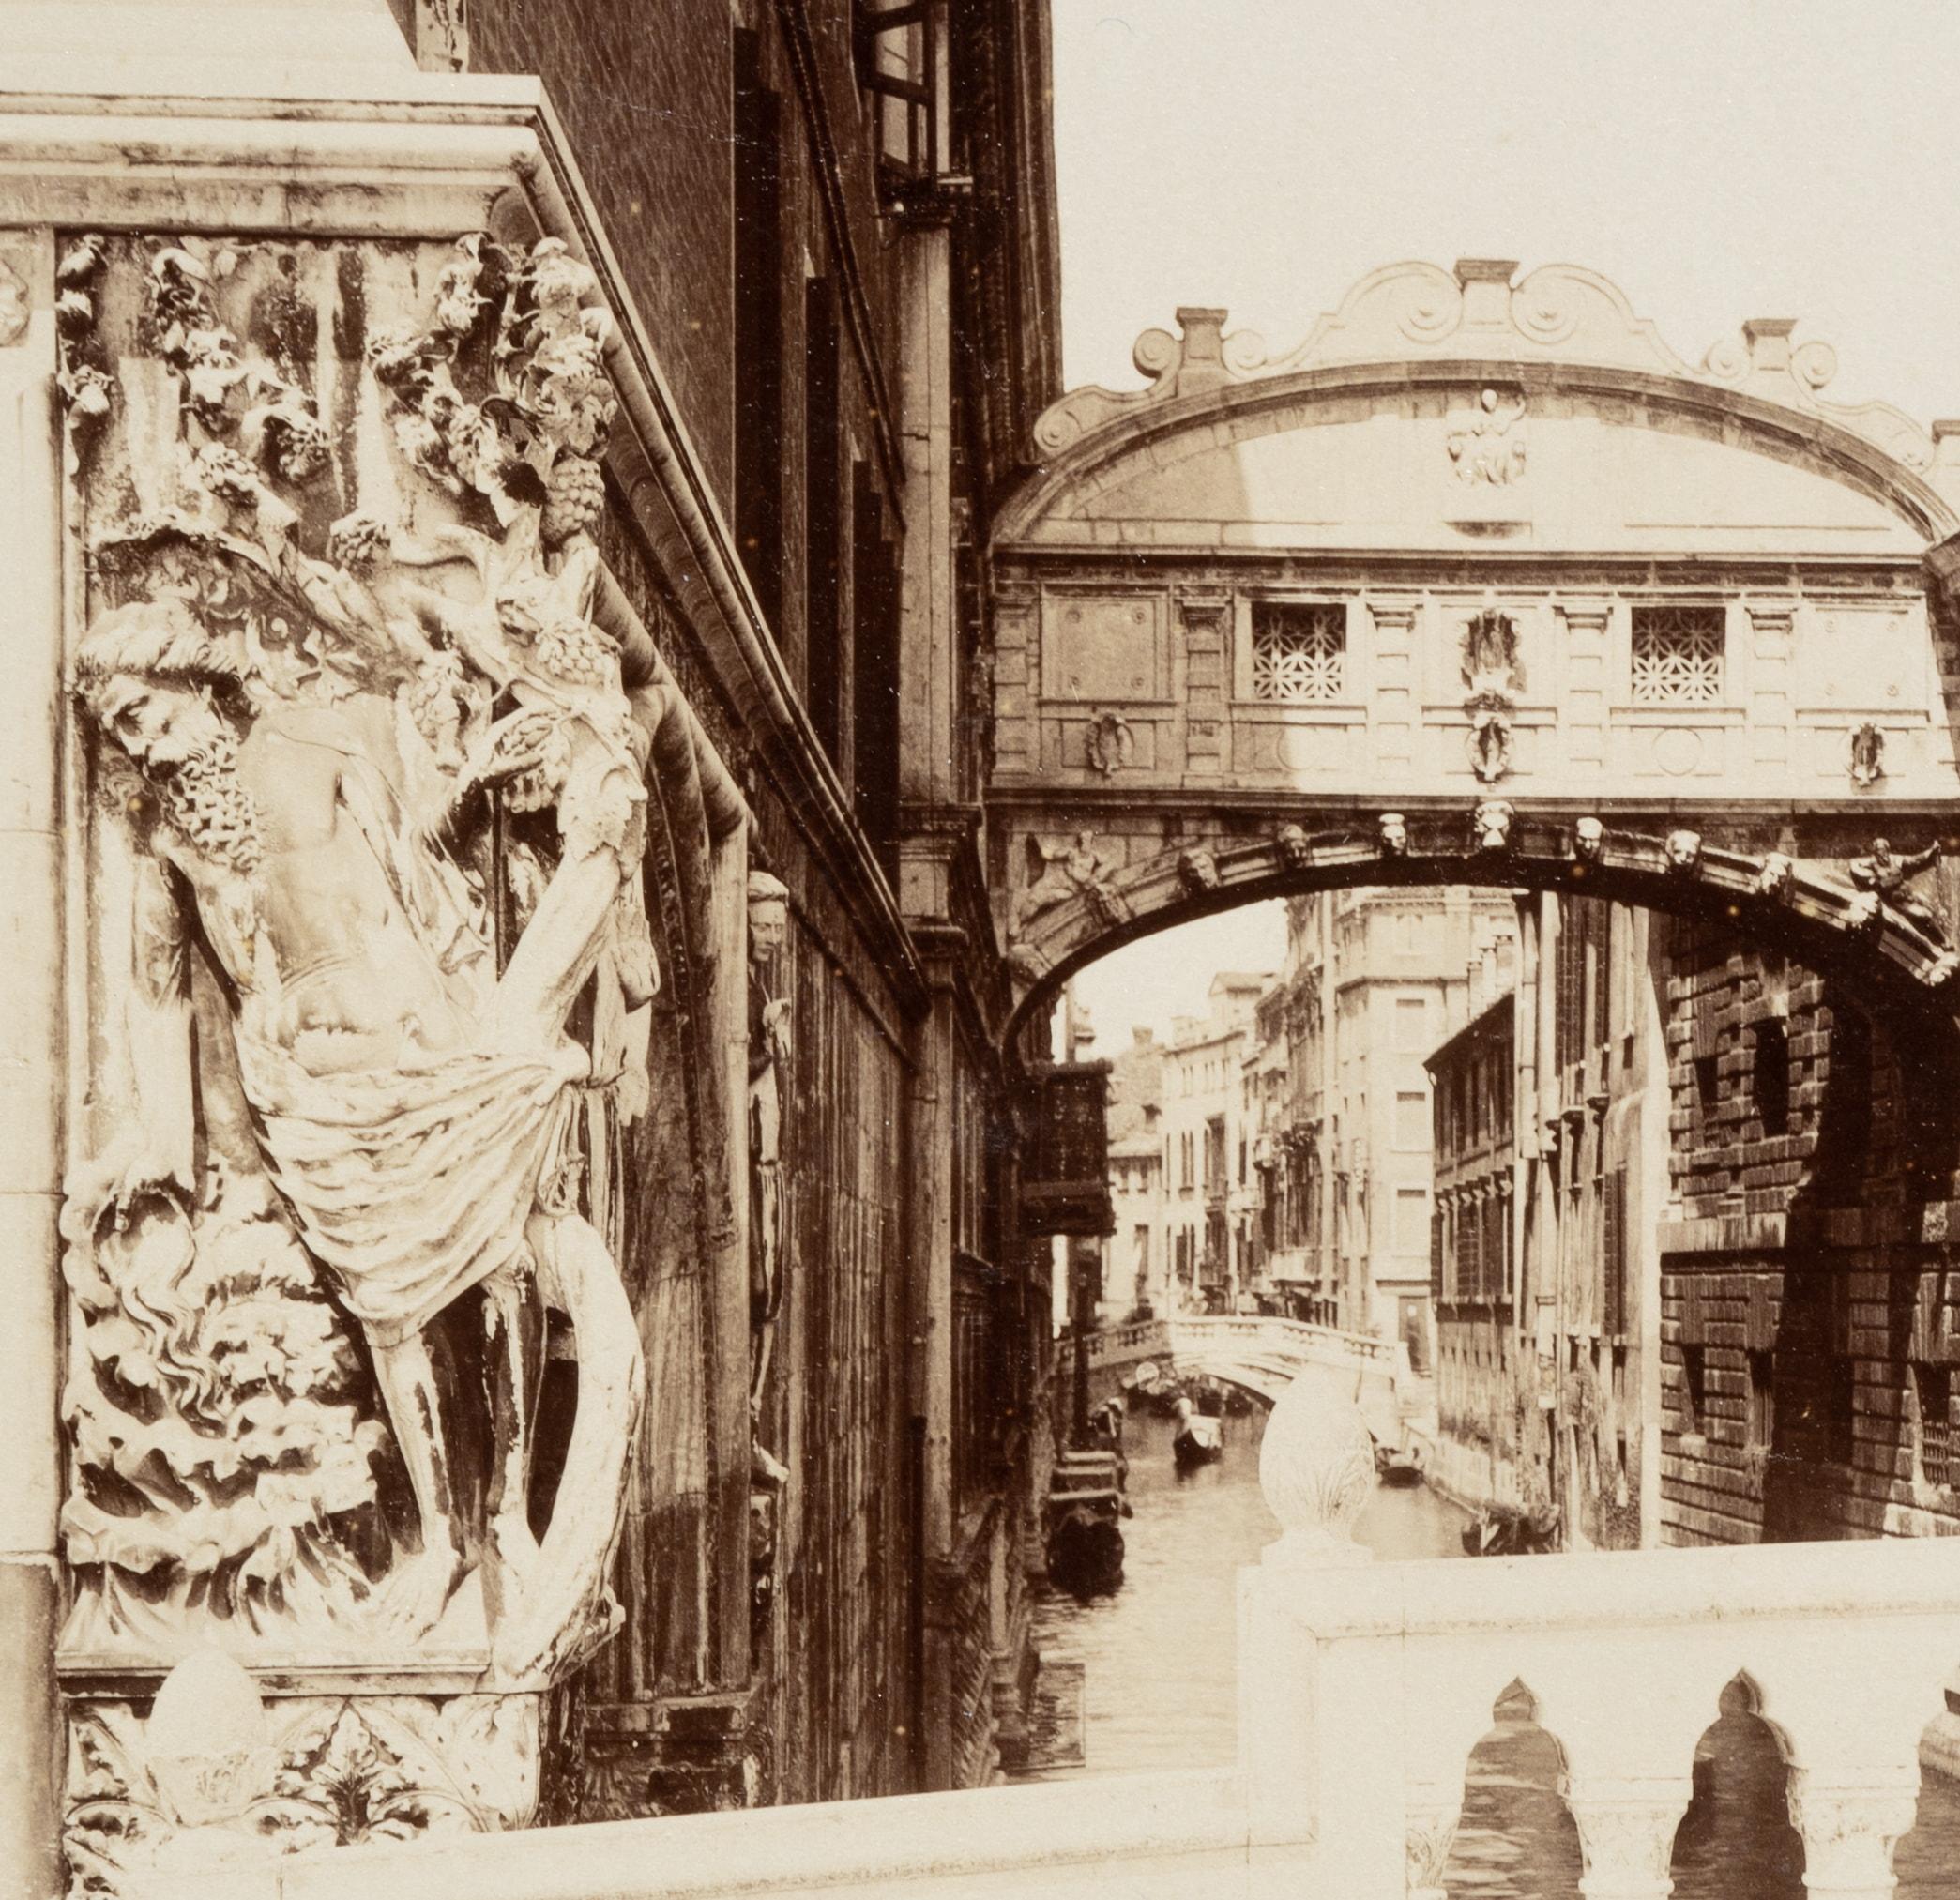 Carlo Naya (1816 Tronzano Vercellese - 1882 Venice) Circle: View from the Ponte della Paglia to the Bridge of Sighs with the bas-relief of the drunken Noah, Venice, c. 1880, albumen paper print

Technique: albumen paper print, mounted on